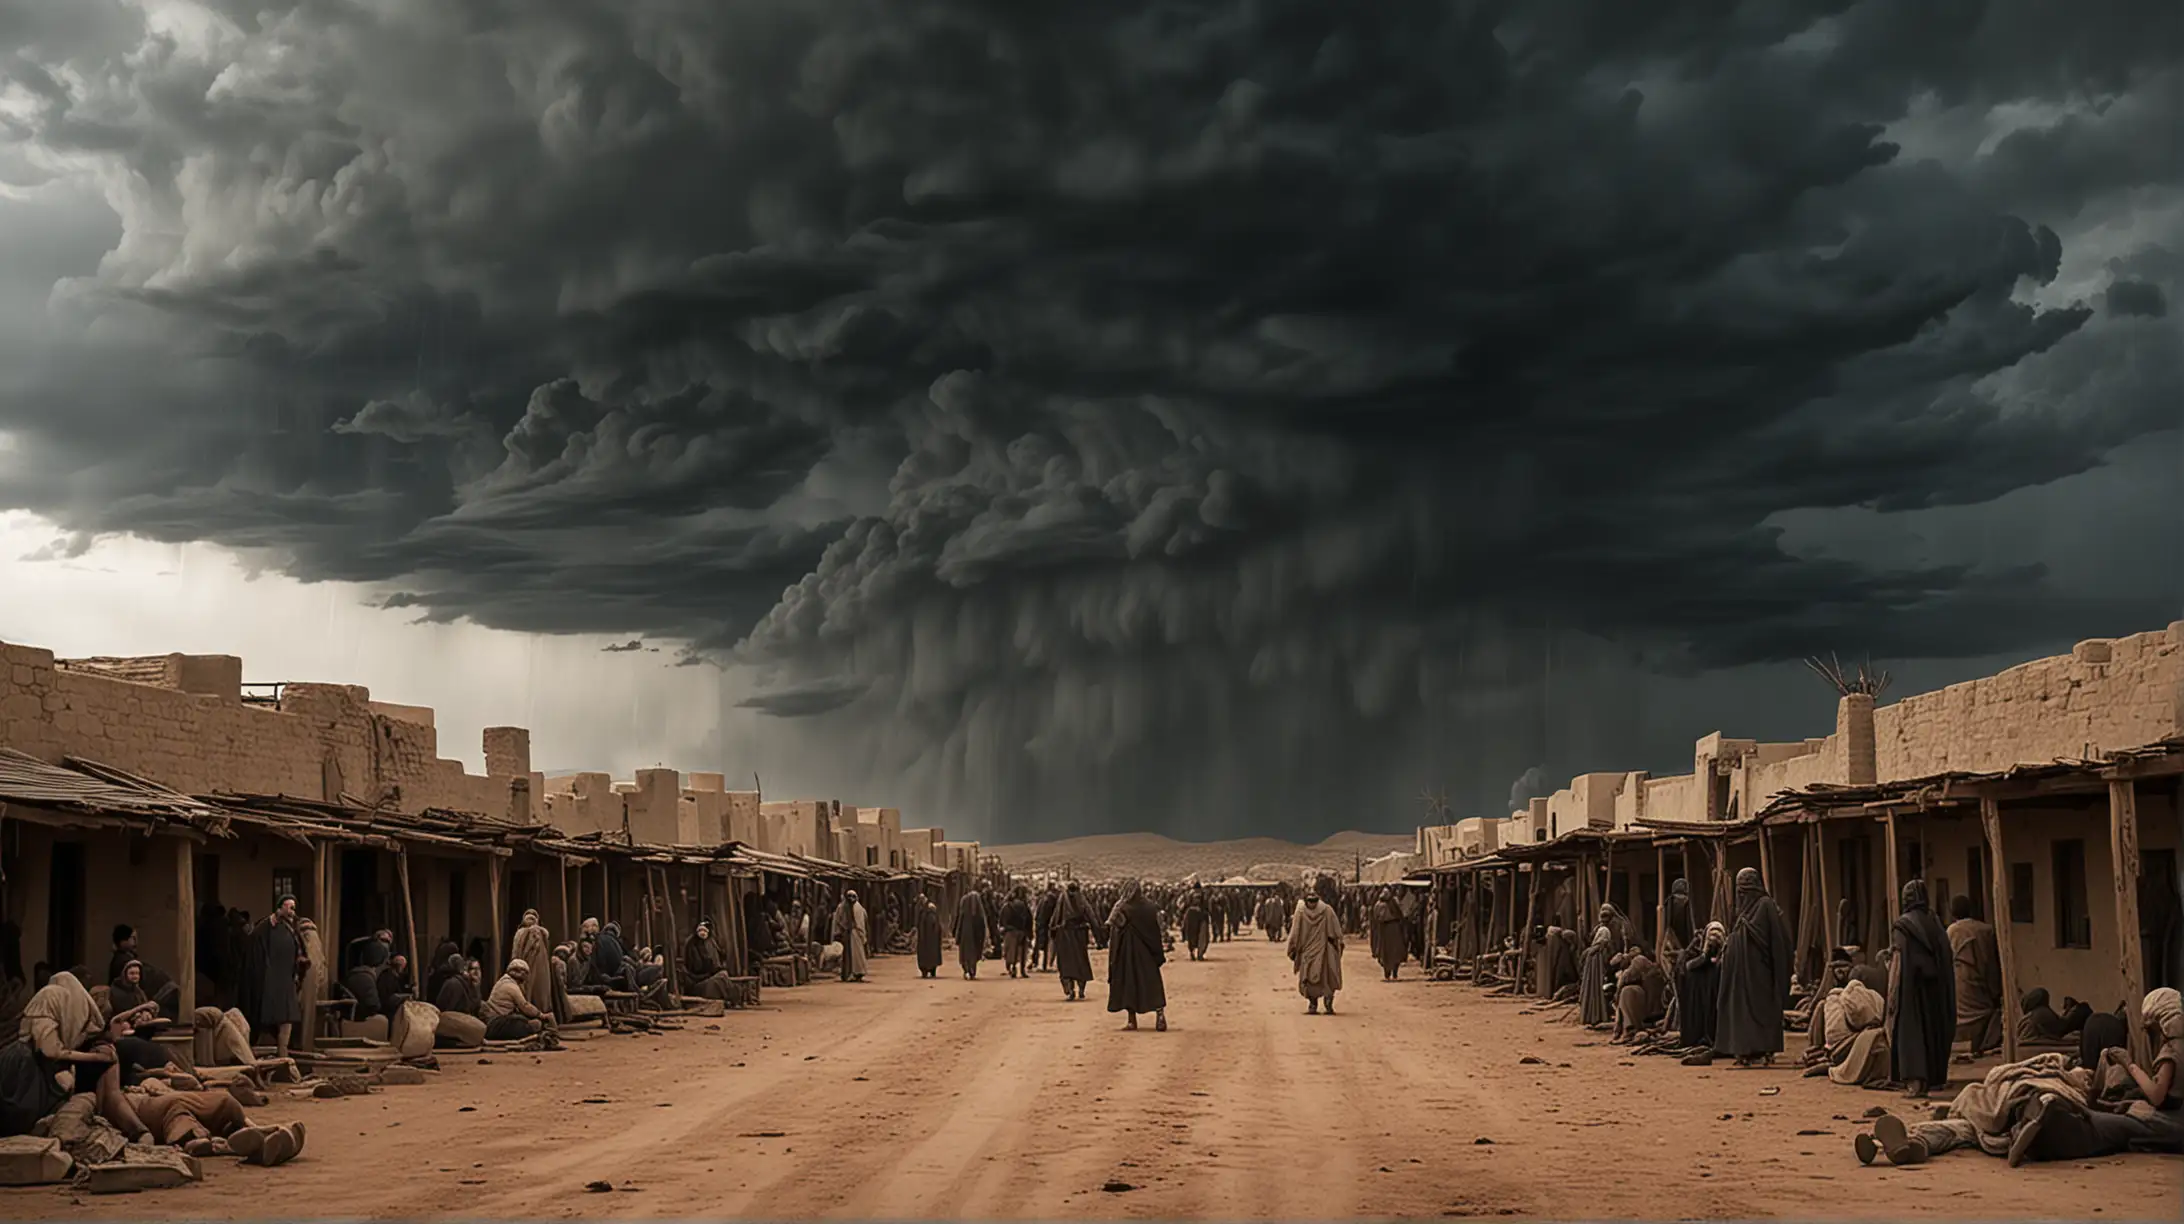 A dark stormy cloud over a desert town, with a crowd of people looking fearful. Set during the Biblical era of Joshua